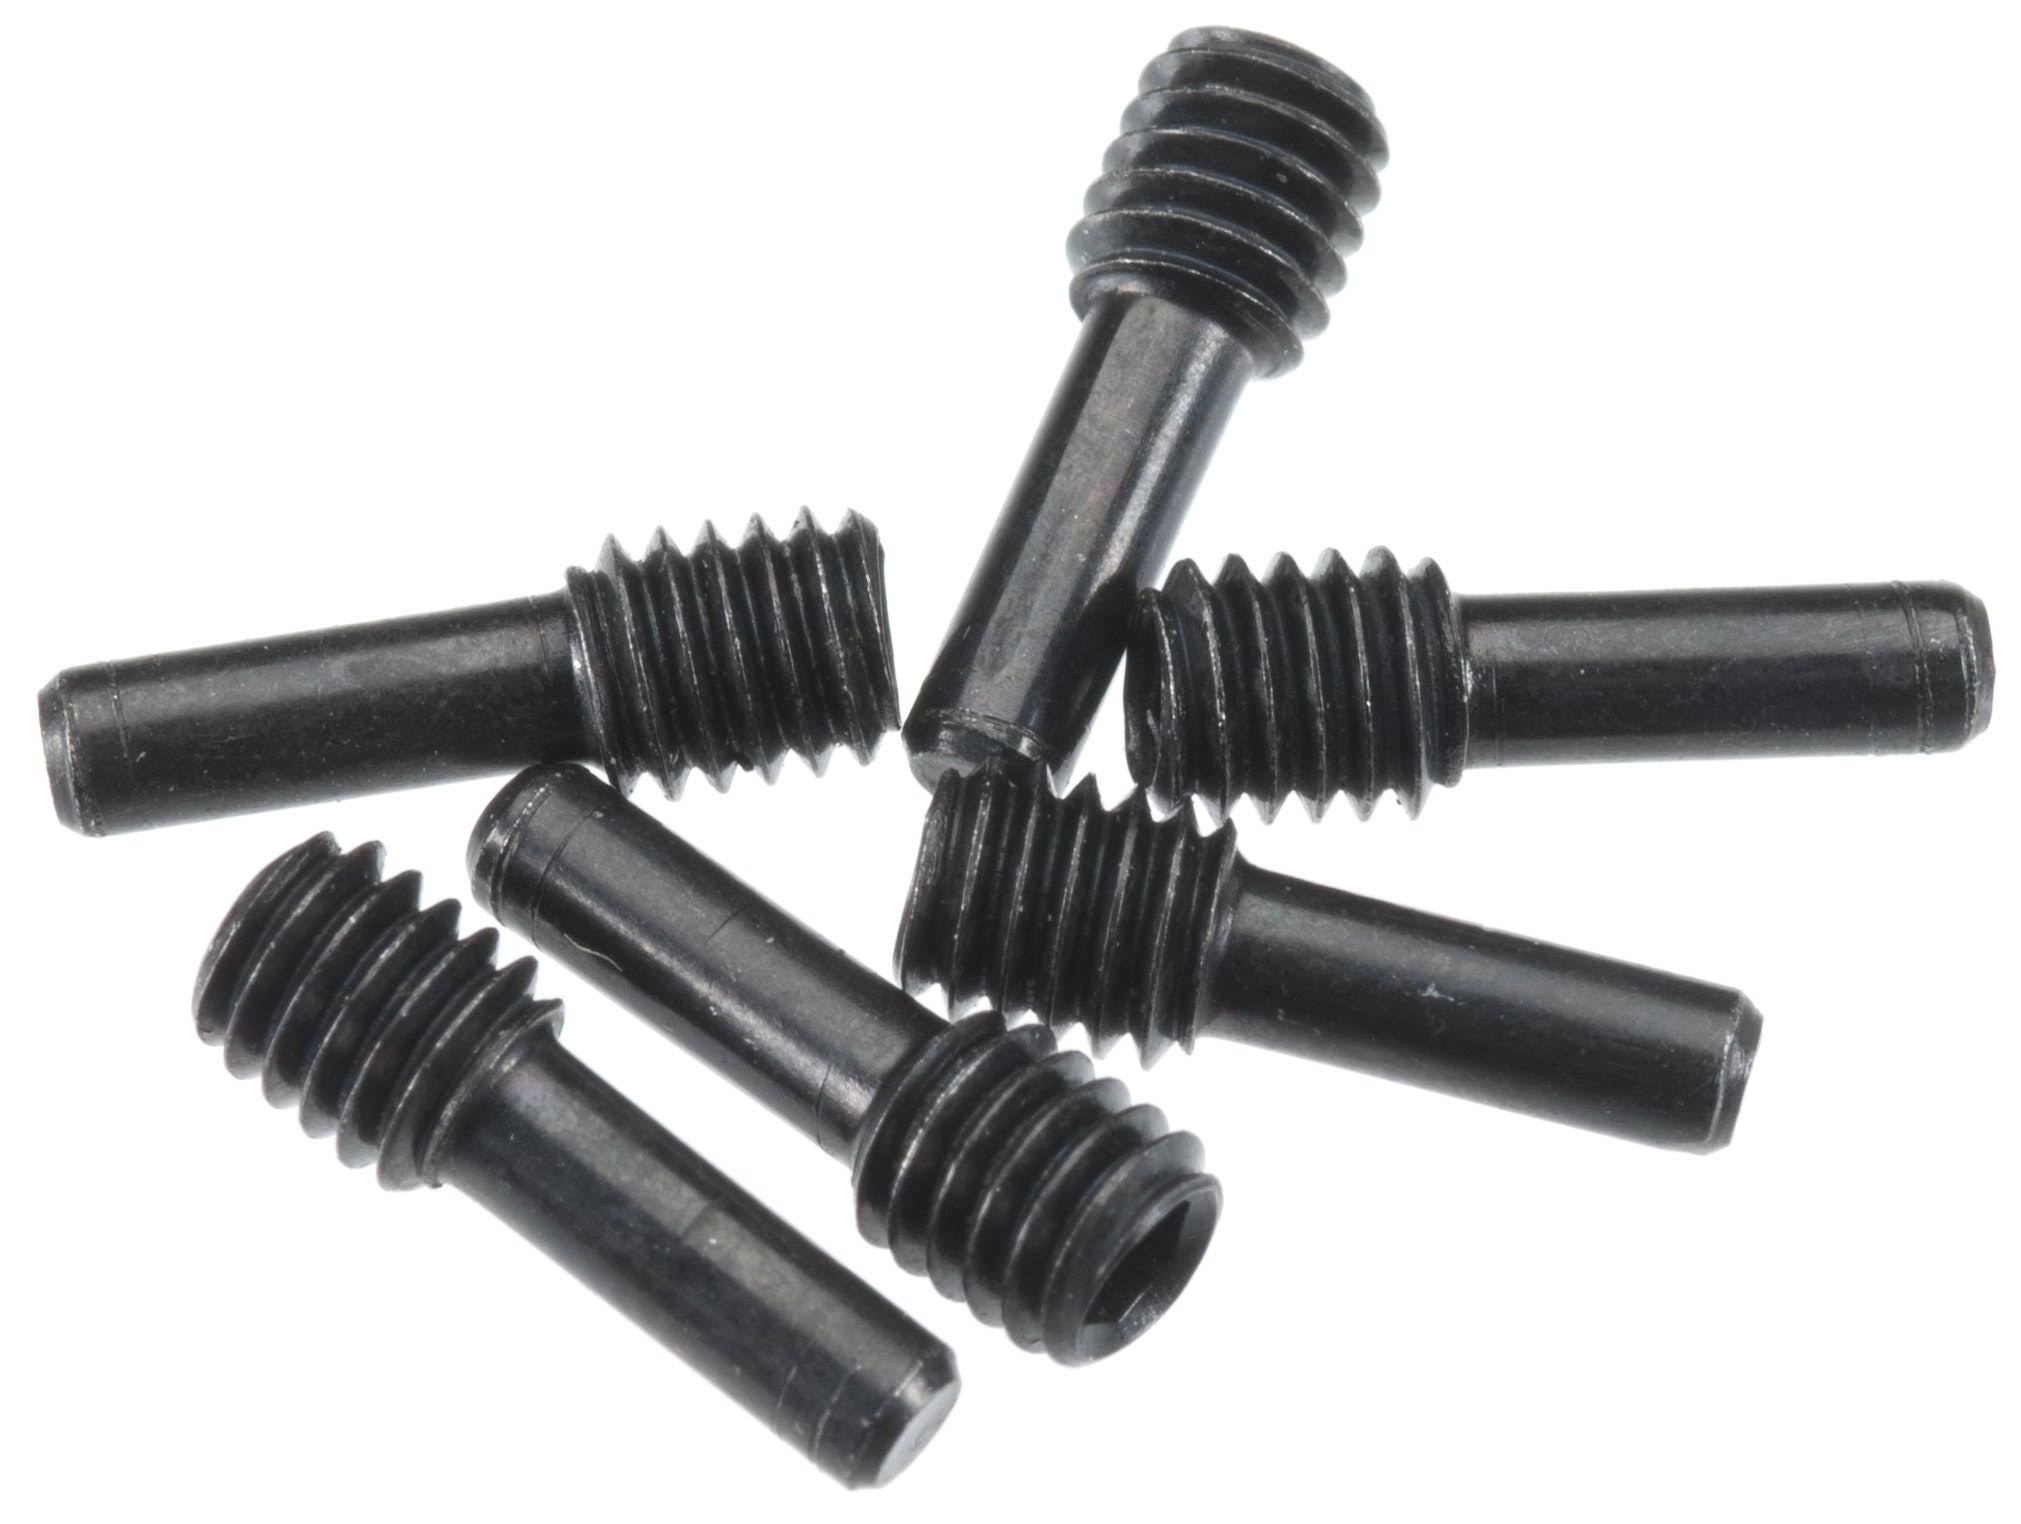 Axial Screw Shaft - M4, 2.5x12mm, 6 Pack